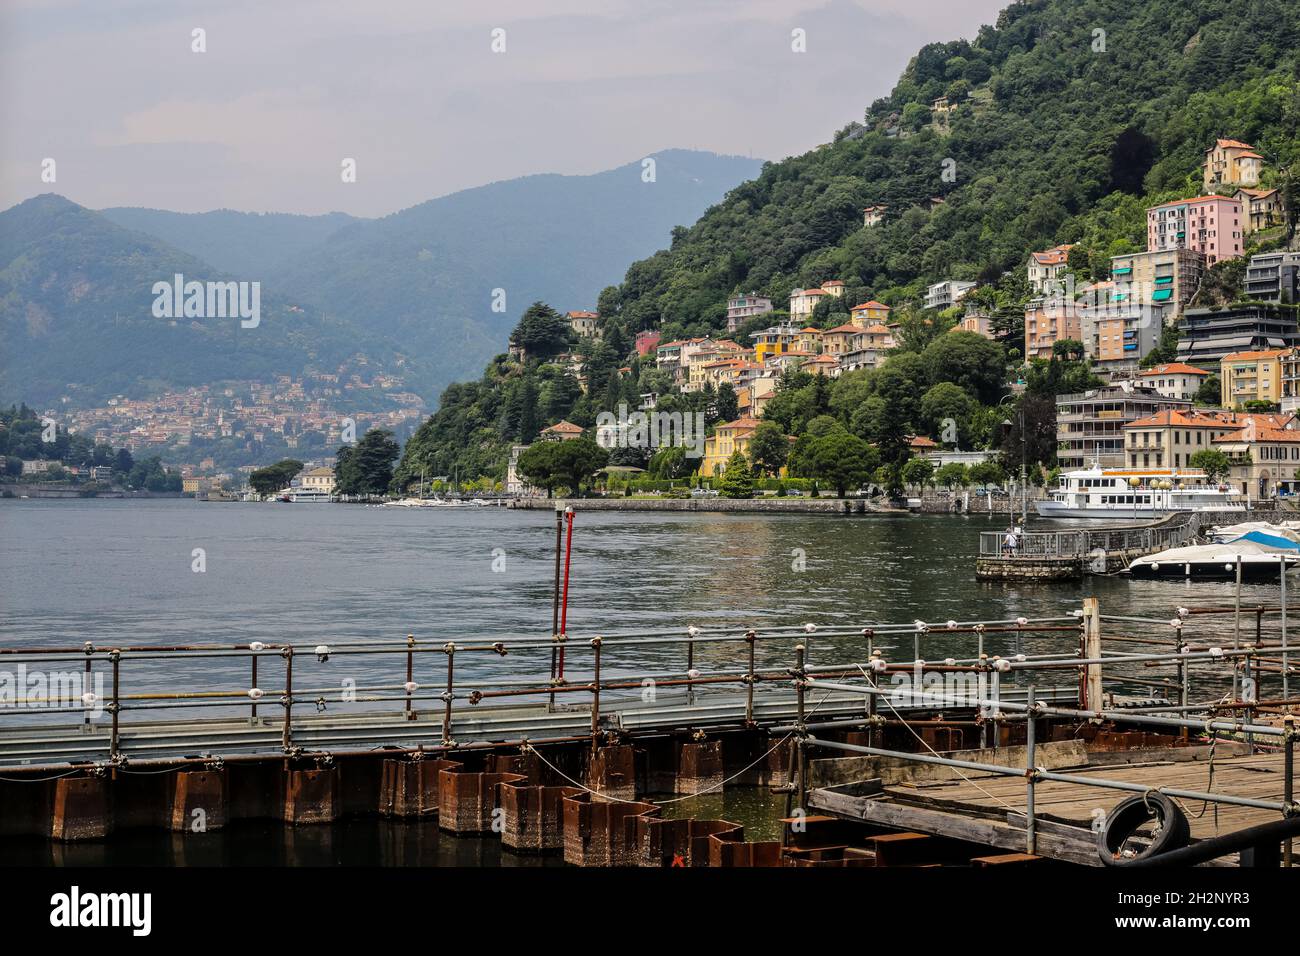 Como, Italy - June 14, 2017: View of Traditional Colorful Buildings from Como Marina Stock Photo